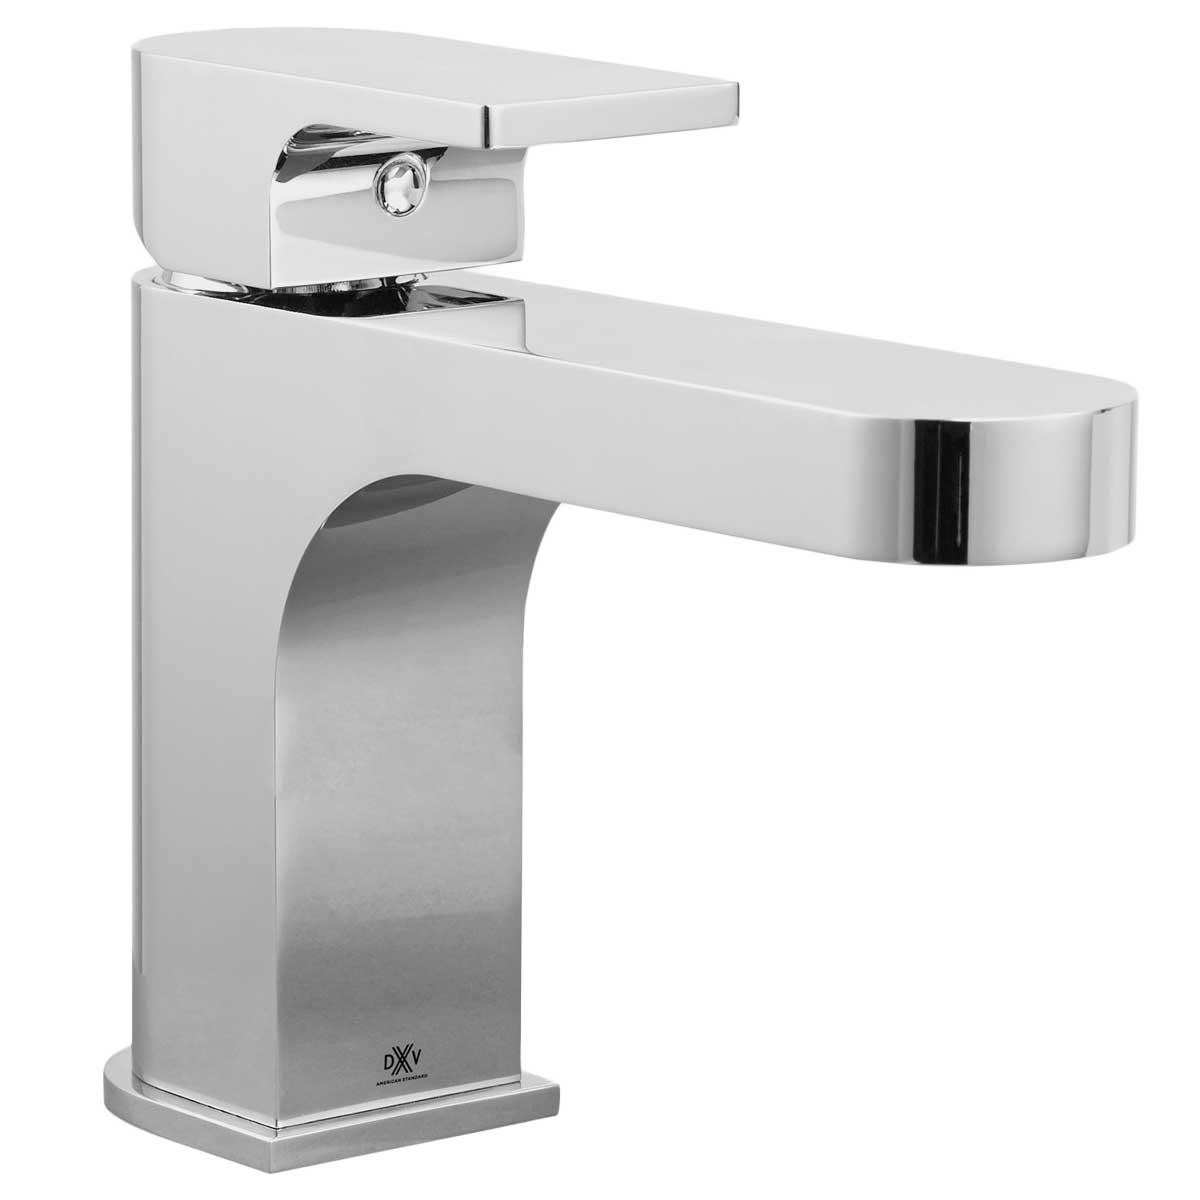 Equility single-handle faucet